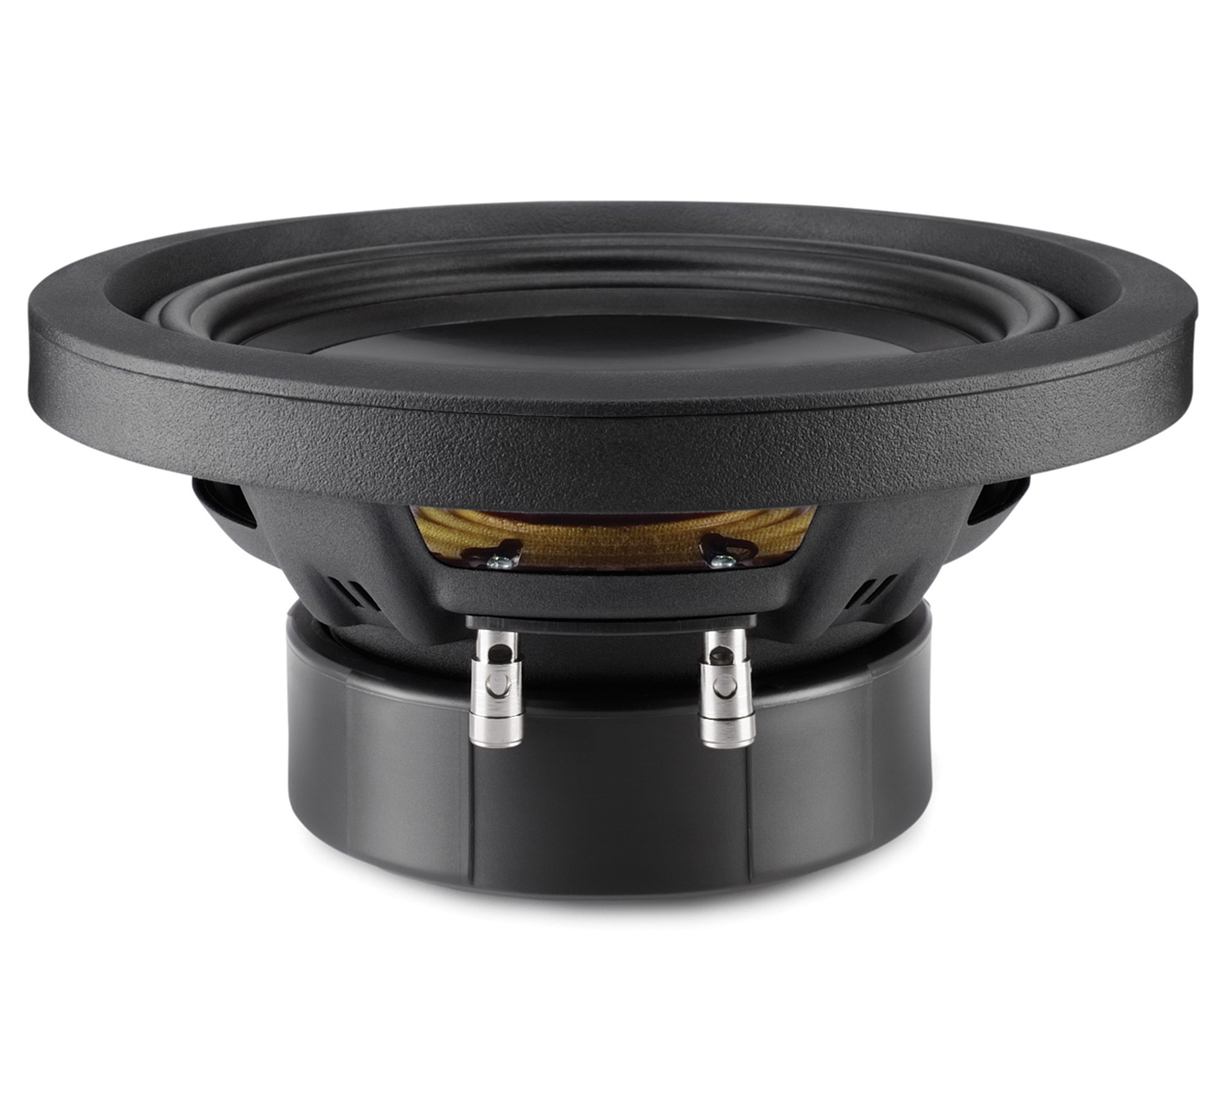 Alpine SWT-10S2 Woofer Review